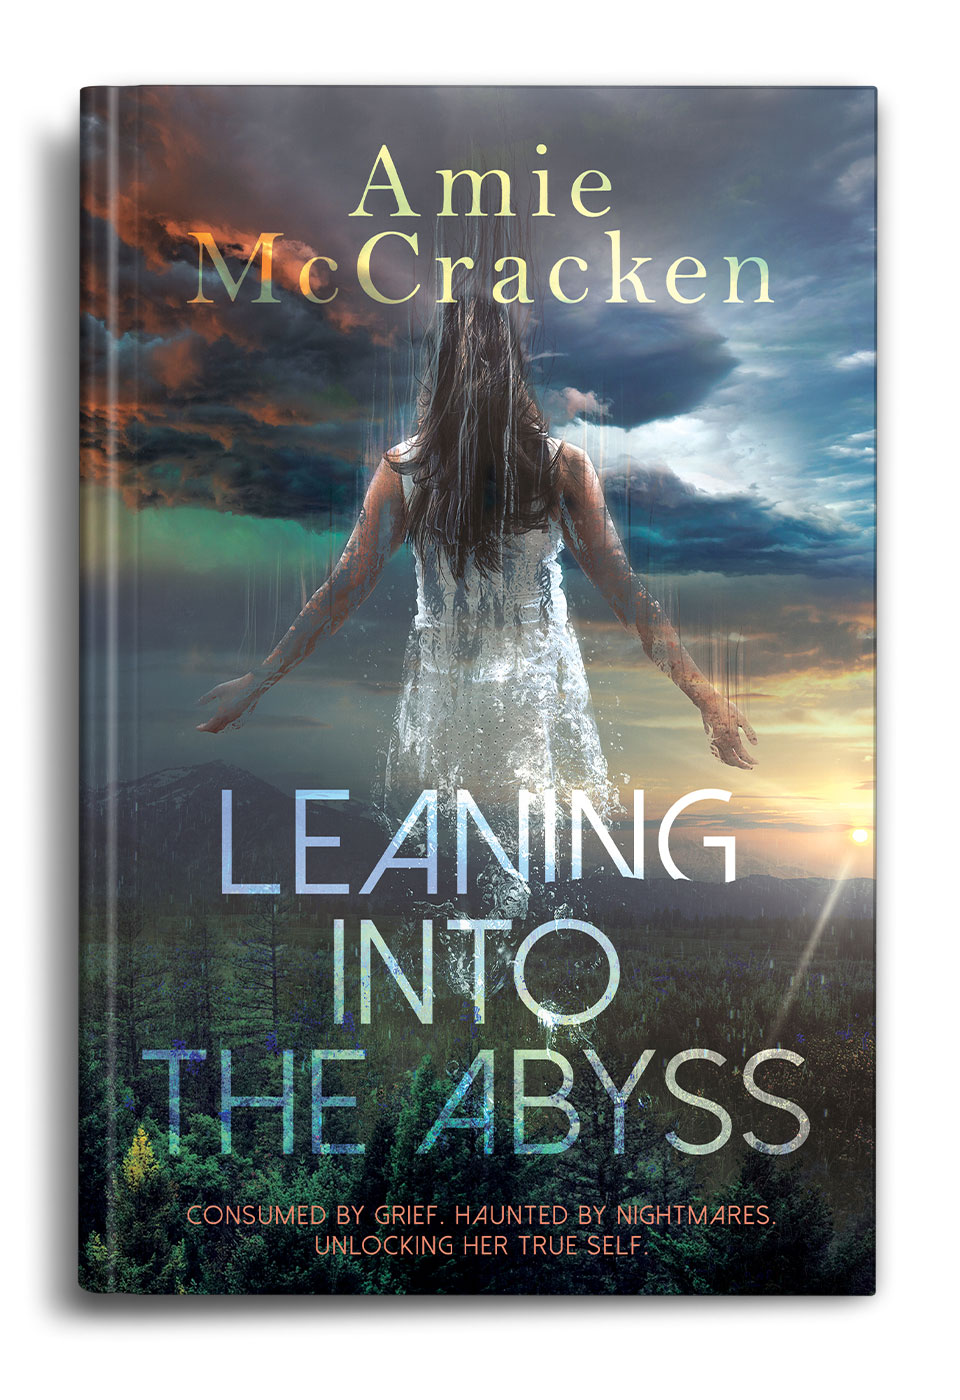 Leaning-into-the-Abyss-by-Amie-McCracken